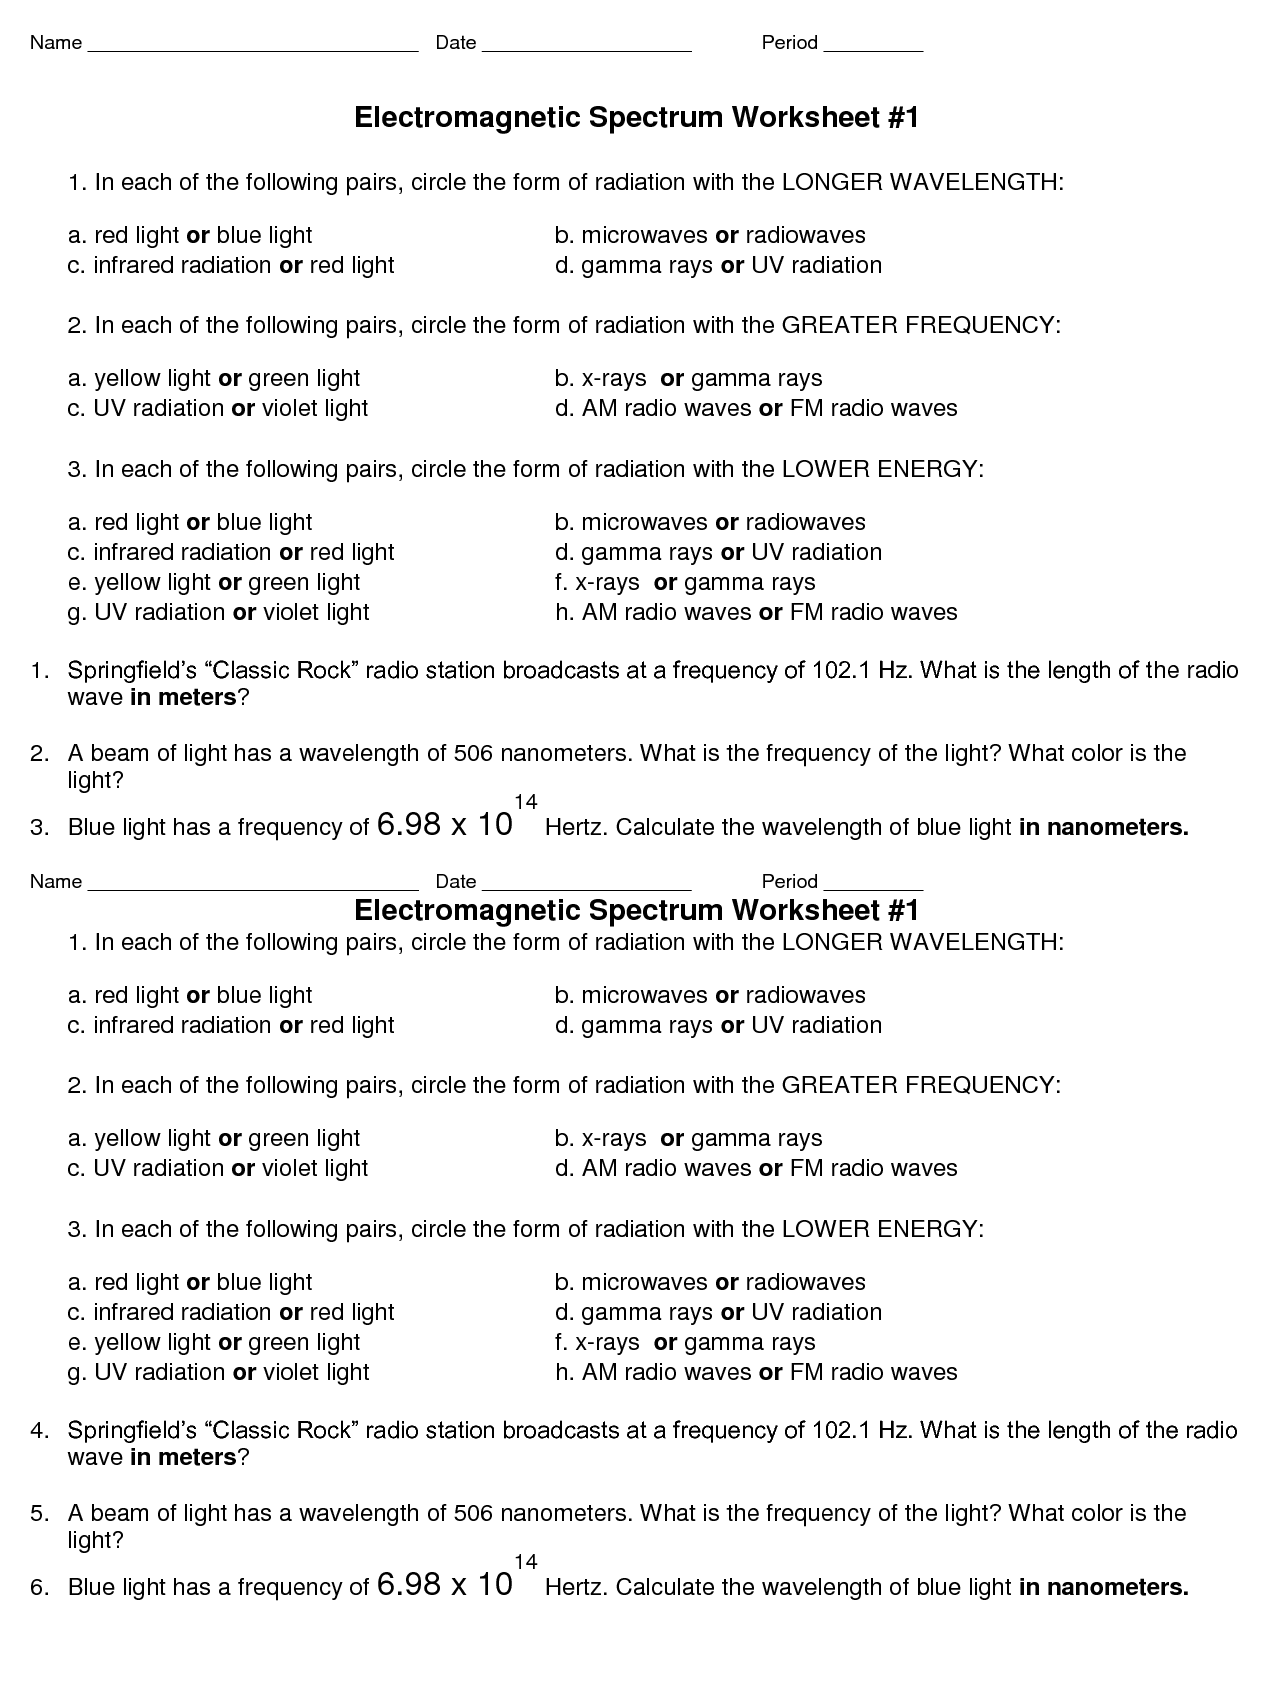 12 Best Images of Science Worksheets With Answer Key - Electromagnetic